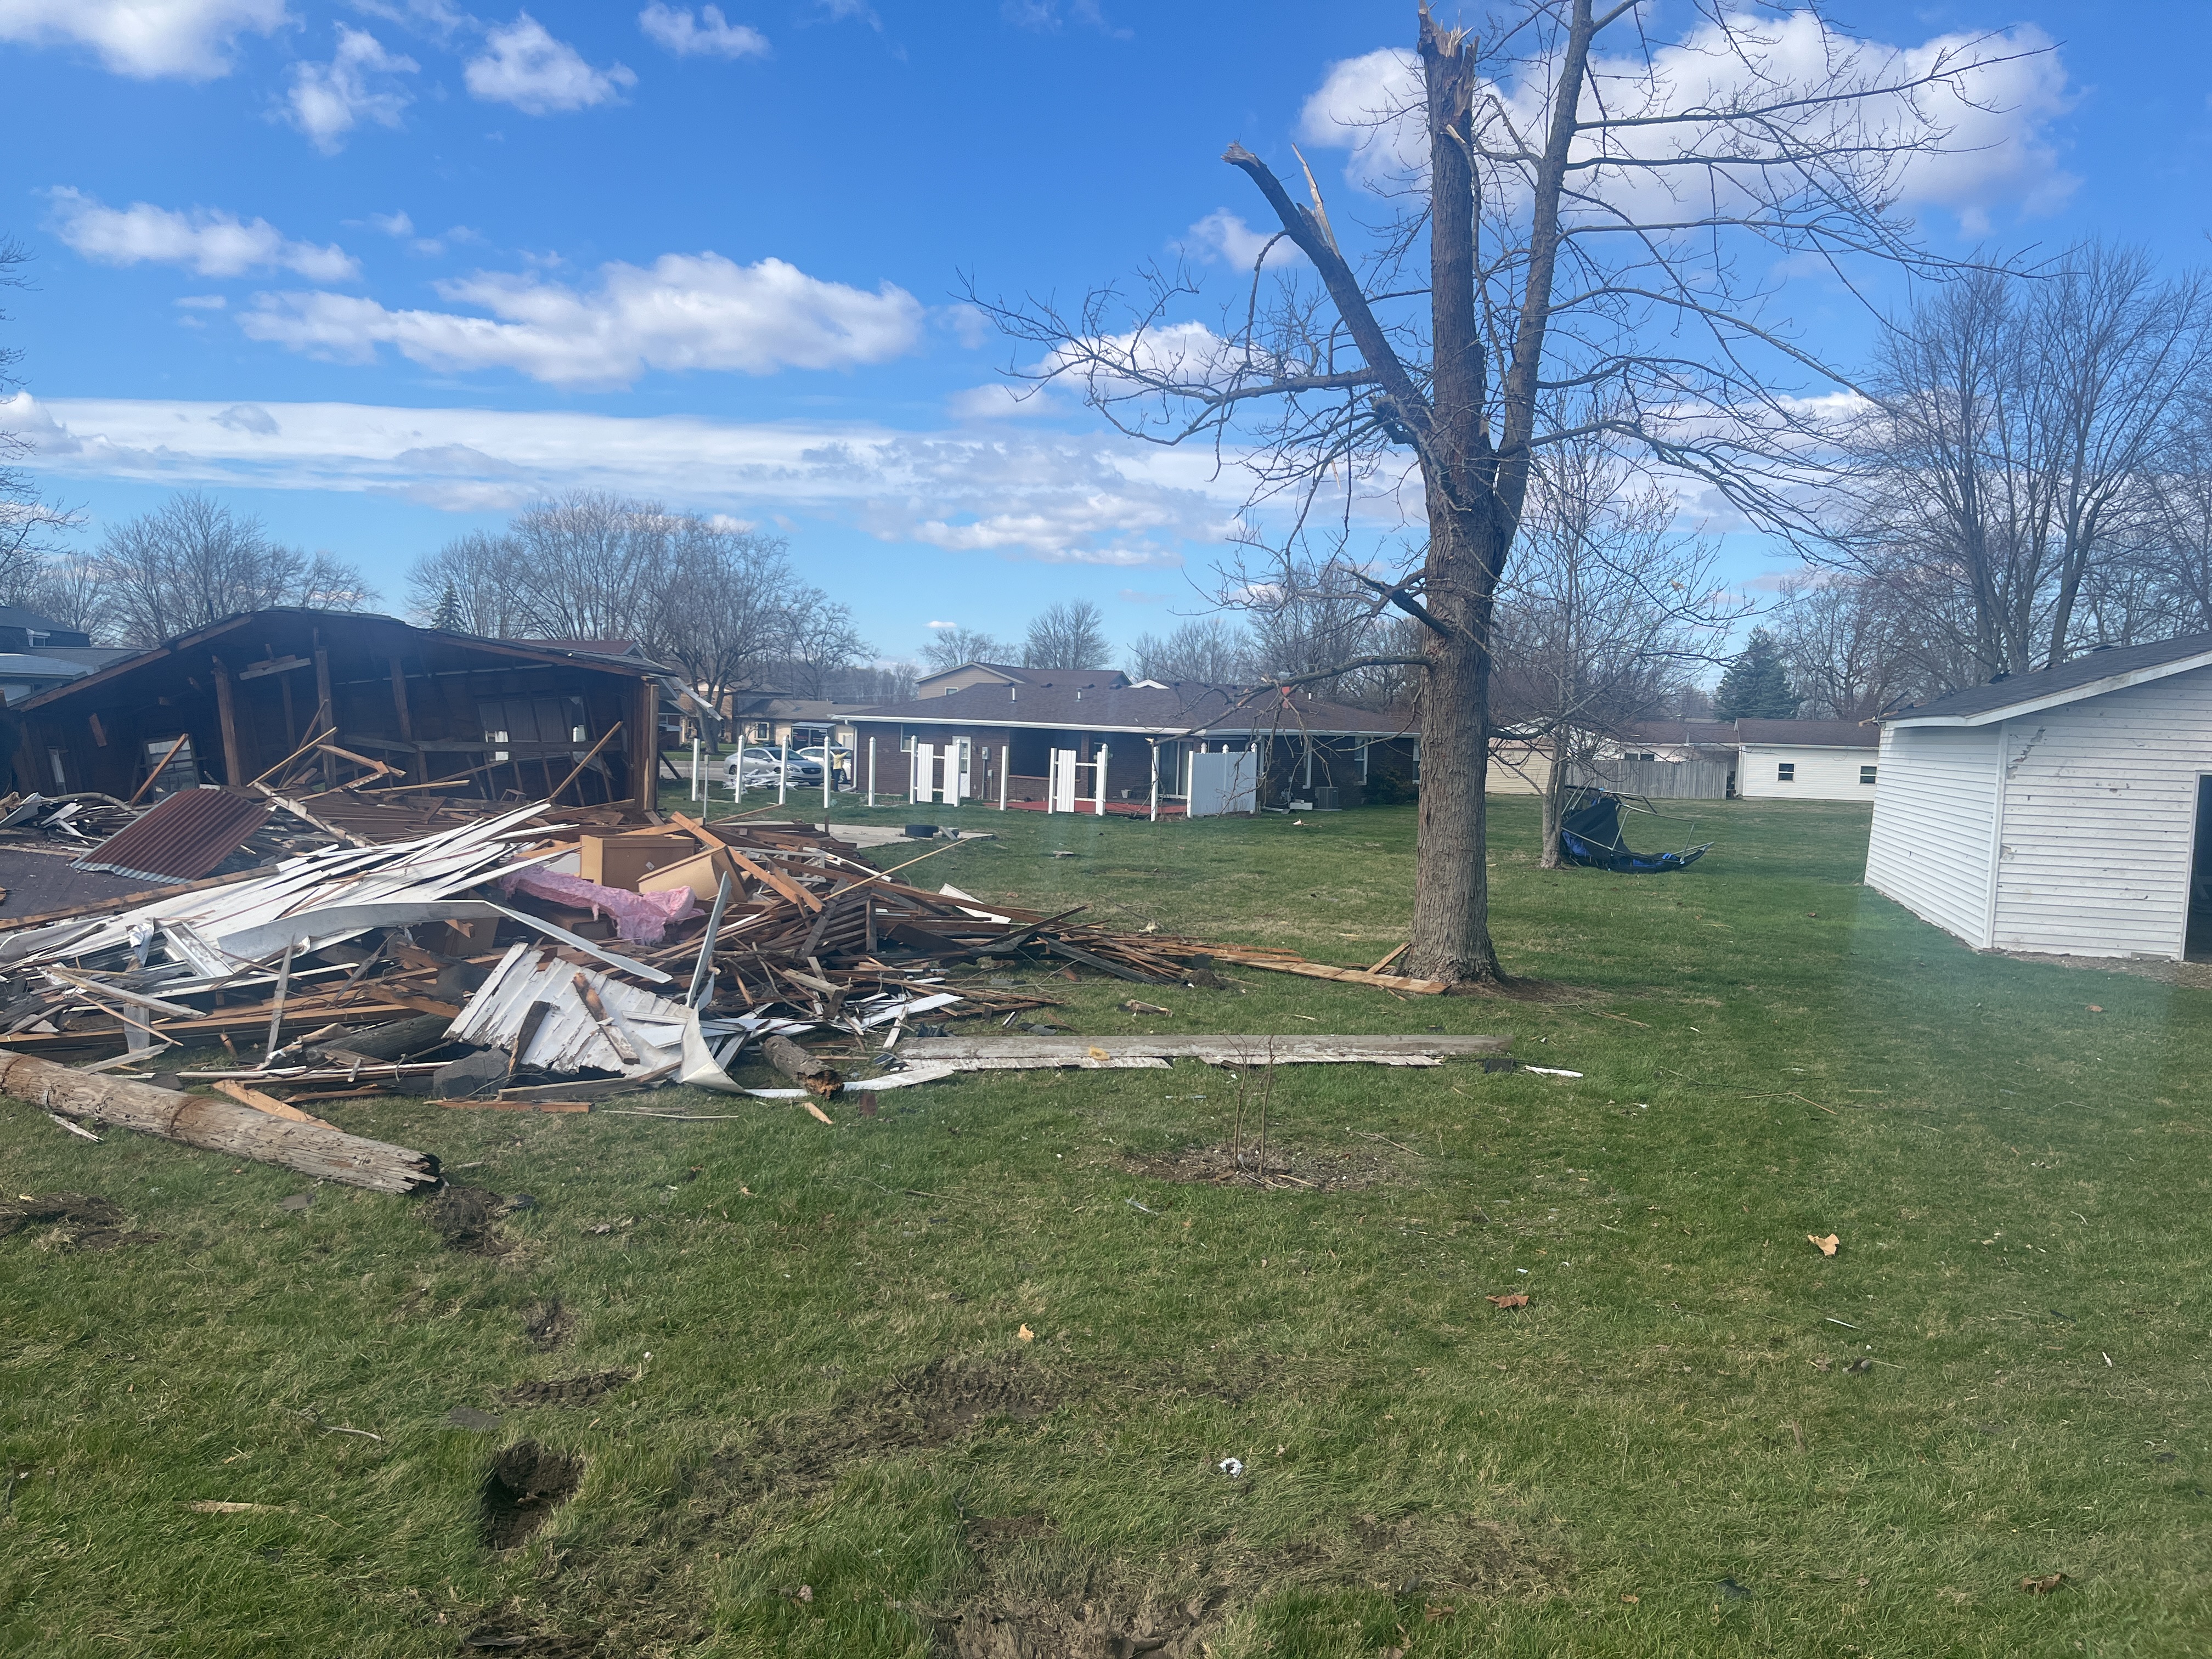 A home that was heavily damaged at EF2 intensity in Selma, Indiana.